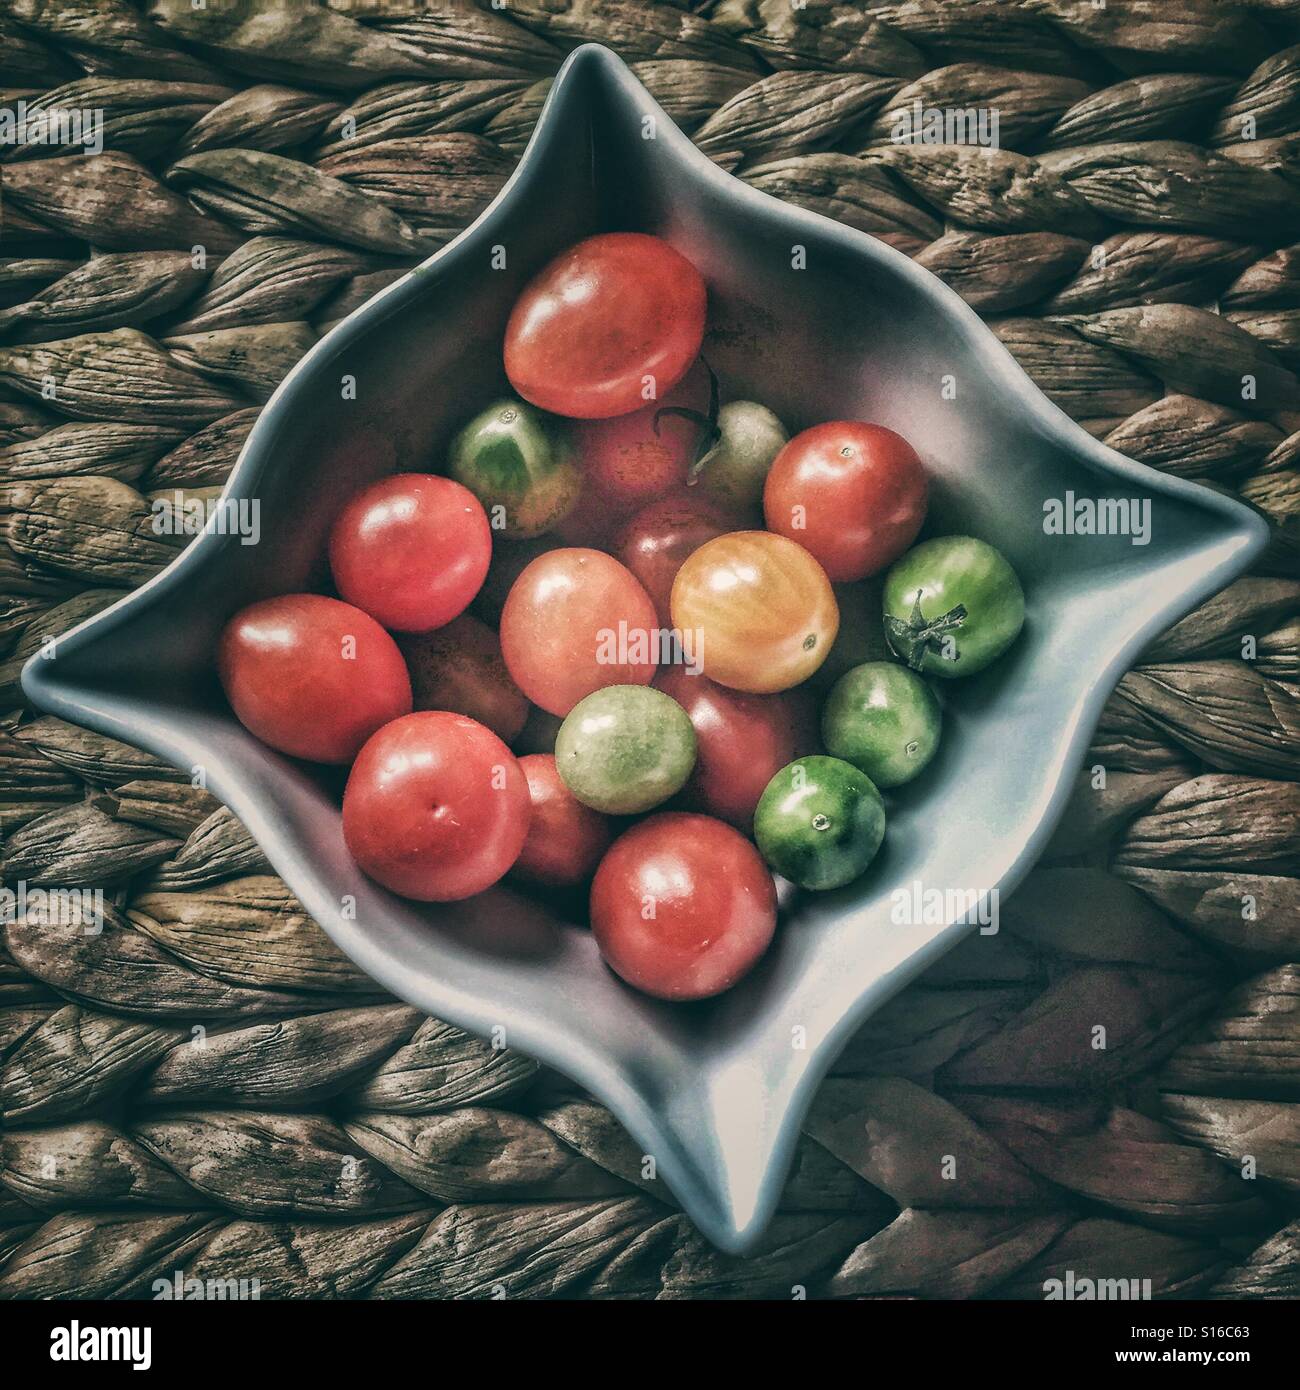 A bowl of cherry tomatoes Stock Photo